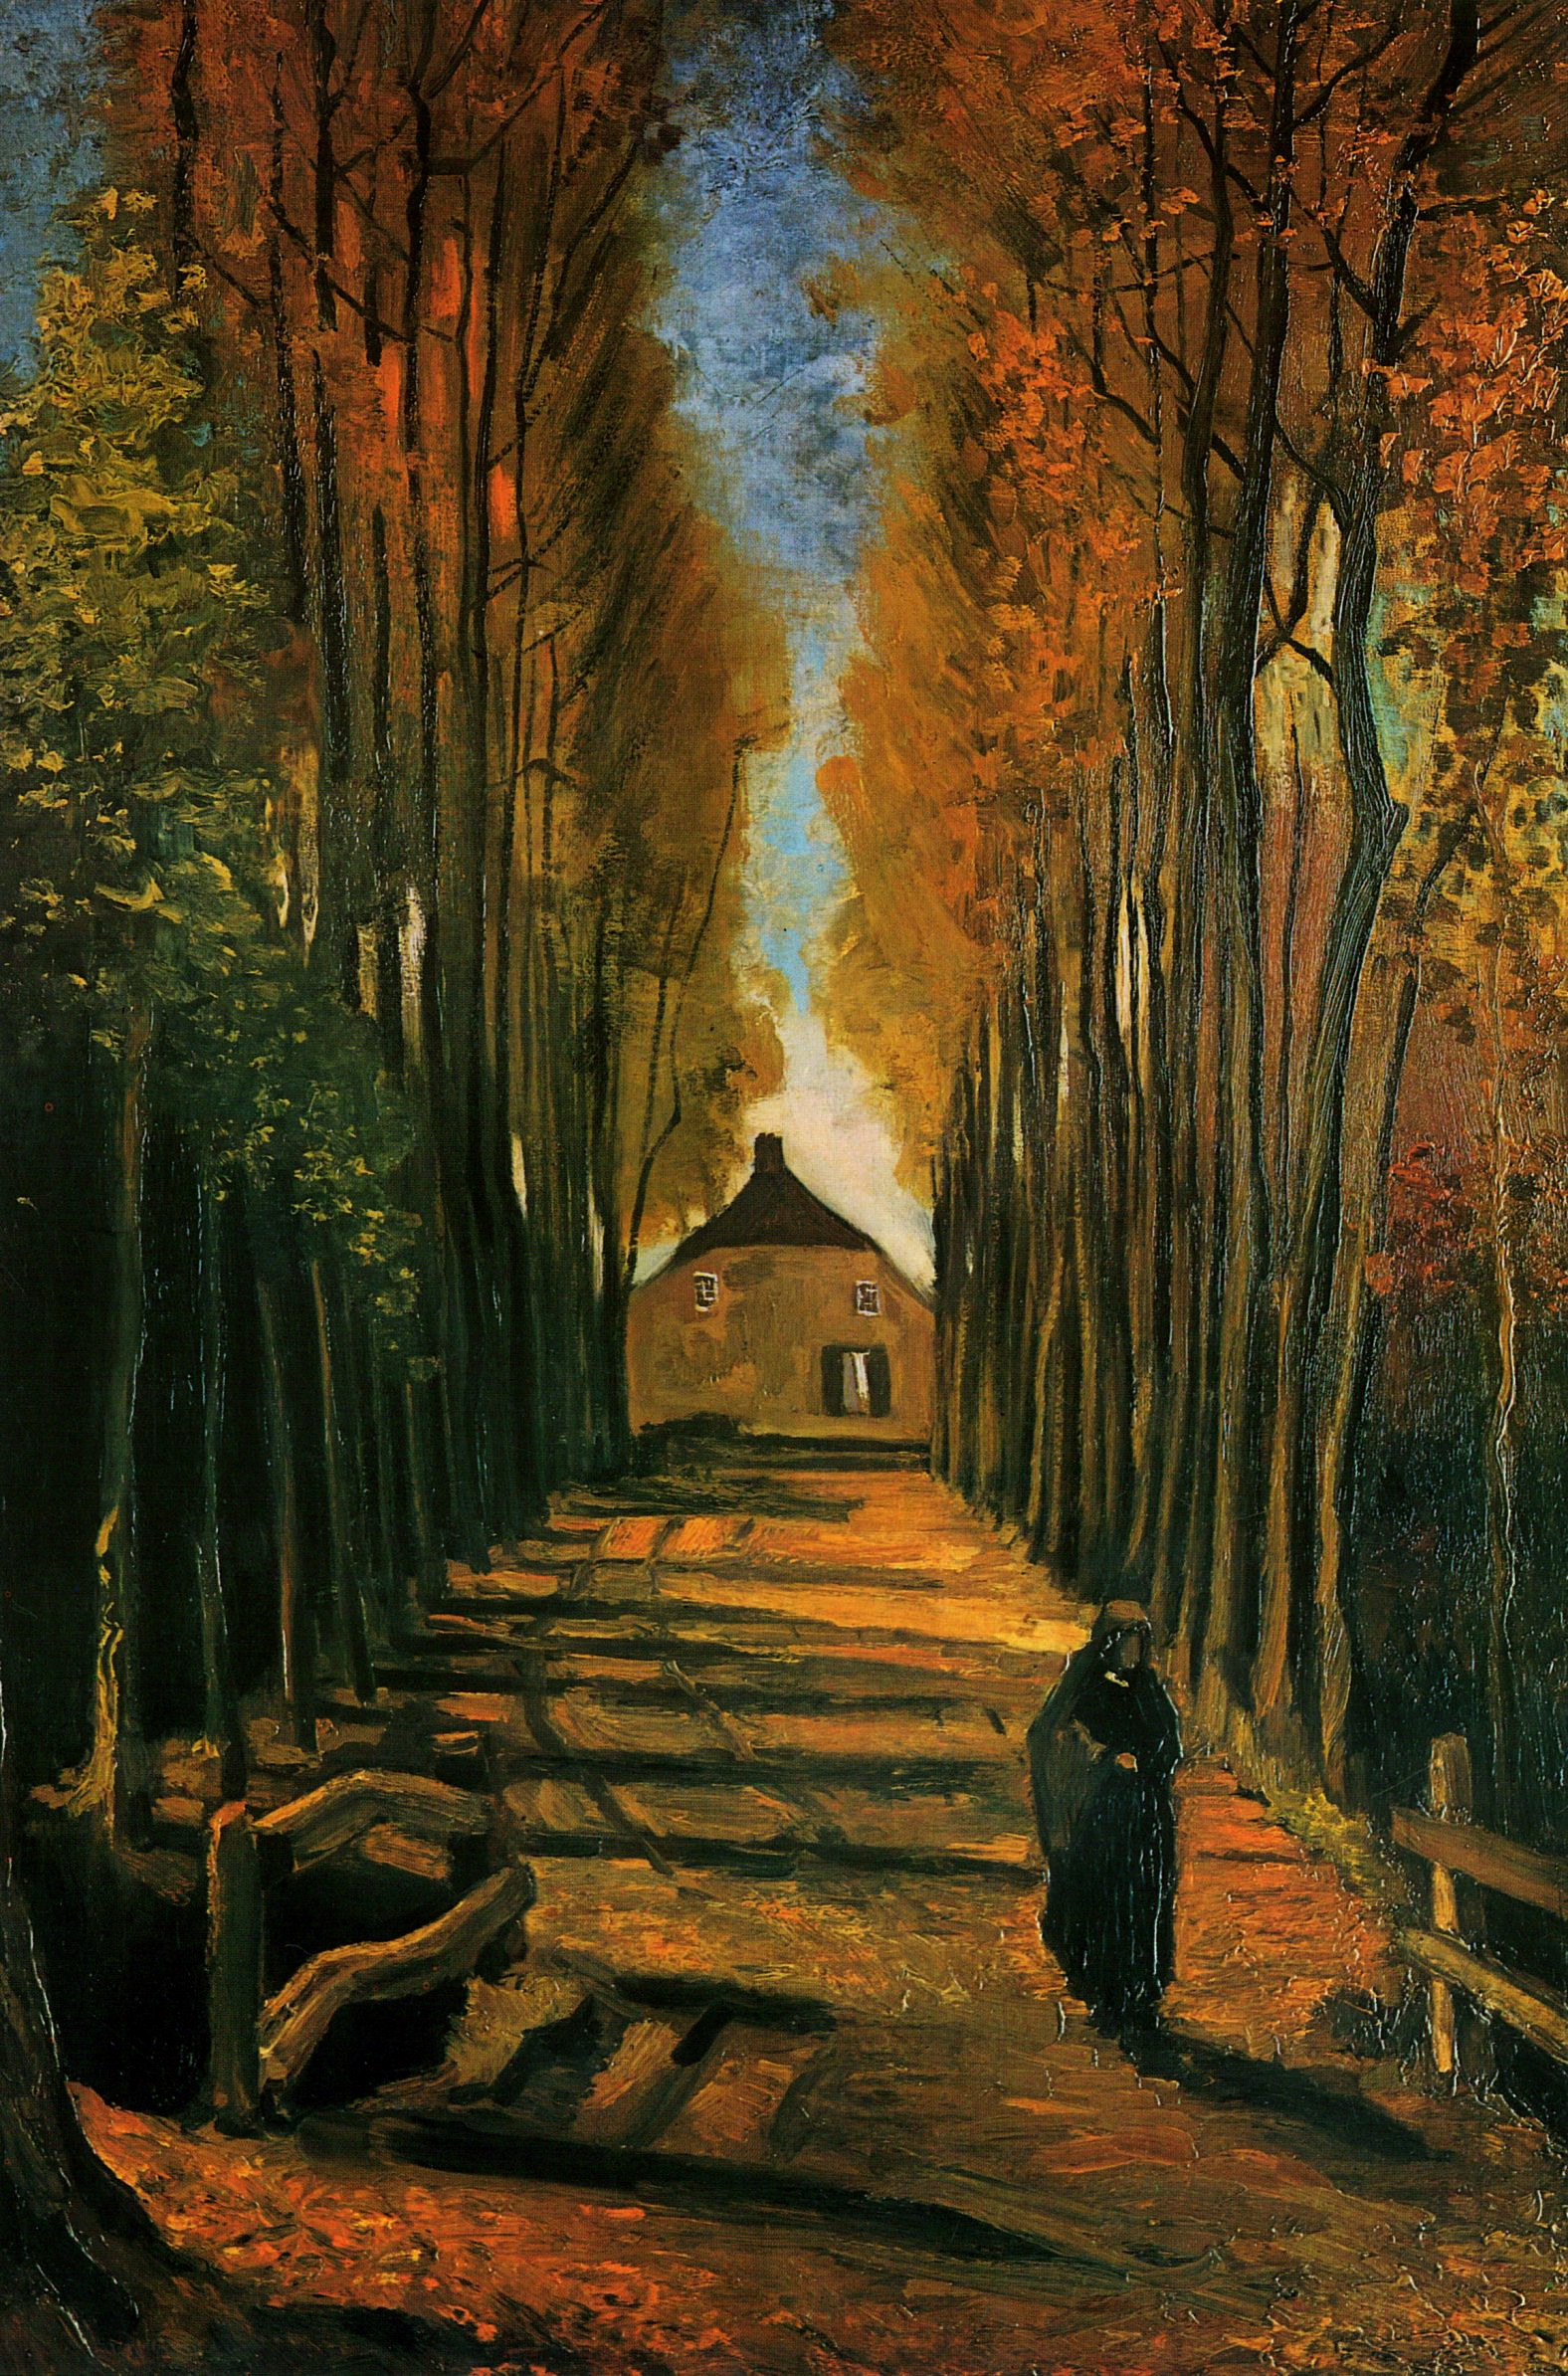 Avenue of Poplars at Sunset, 1884 - Vincent van Gogh - WikiArt.org